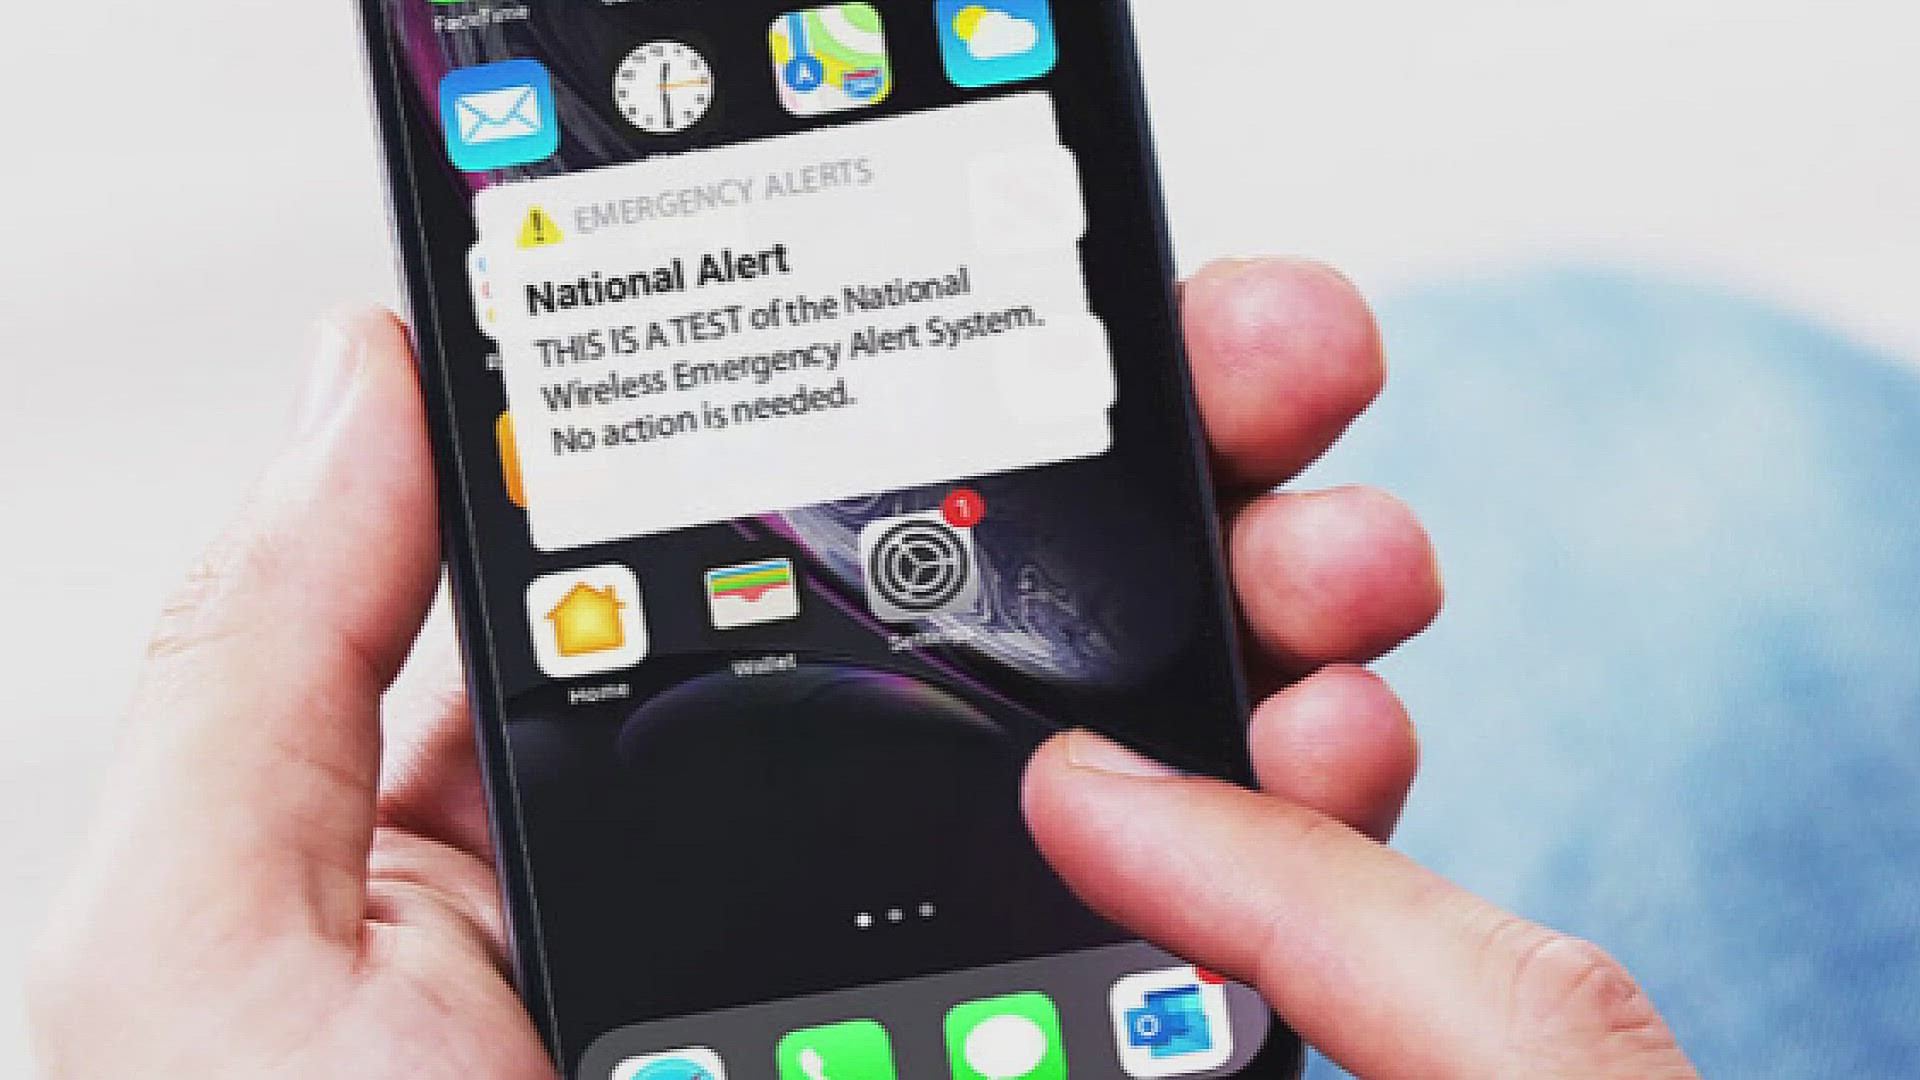 The loud-sounding alert could be a risk for survivors of domestic abuse who live with an abuser and who have a hidden cell phone.